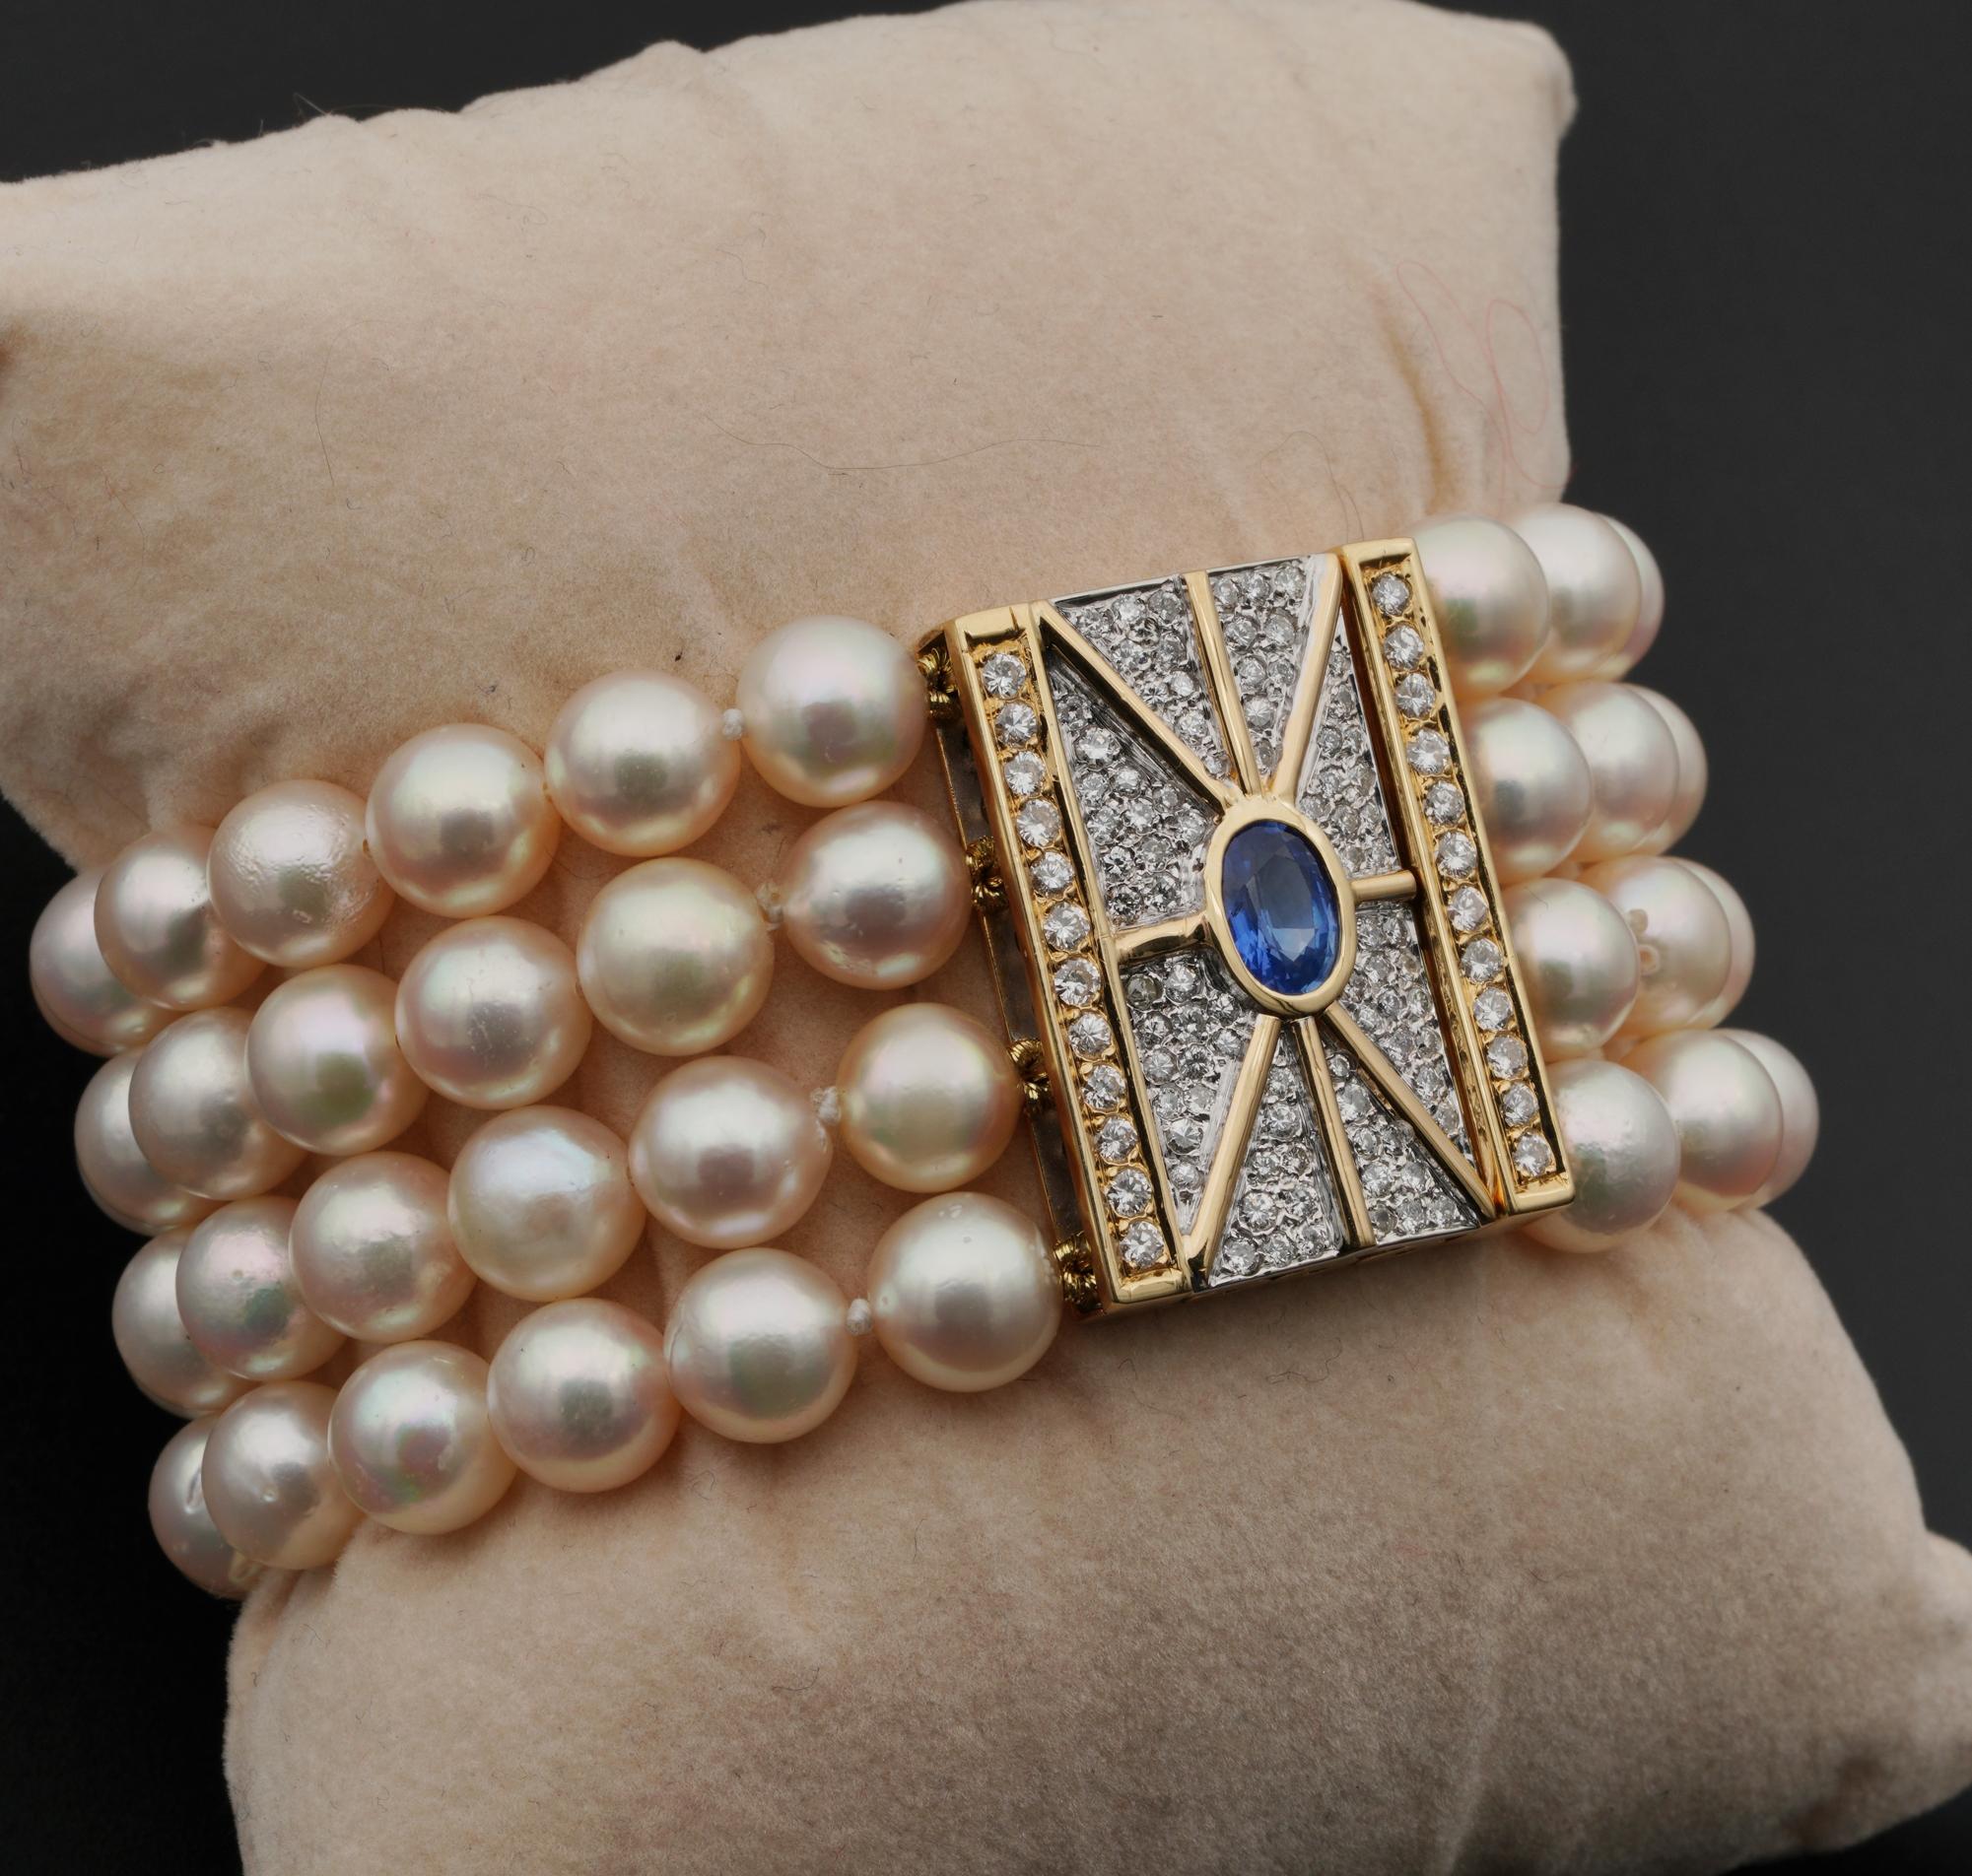 Elegance Imprint

An outstanding vintage Pearl cocktail bracelet of great impact to the viewer and effective imprint of elegance for the wearer
Large, imposing and statement piece of the classy jewellery
Mid century era, this means that it is 50